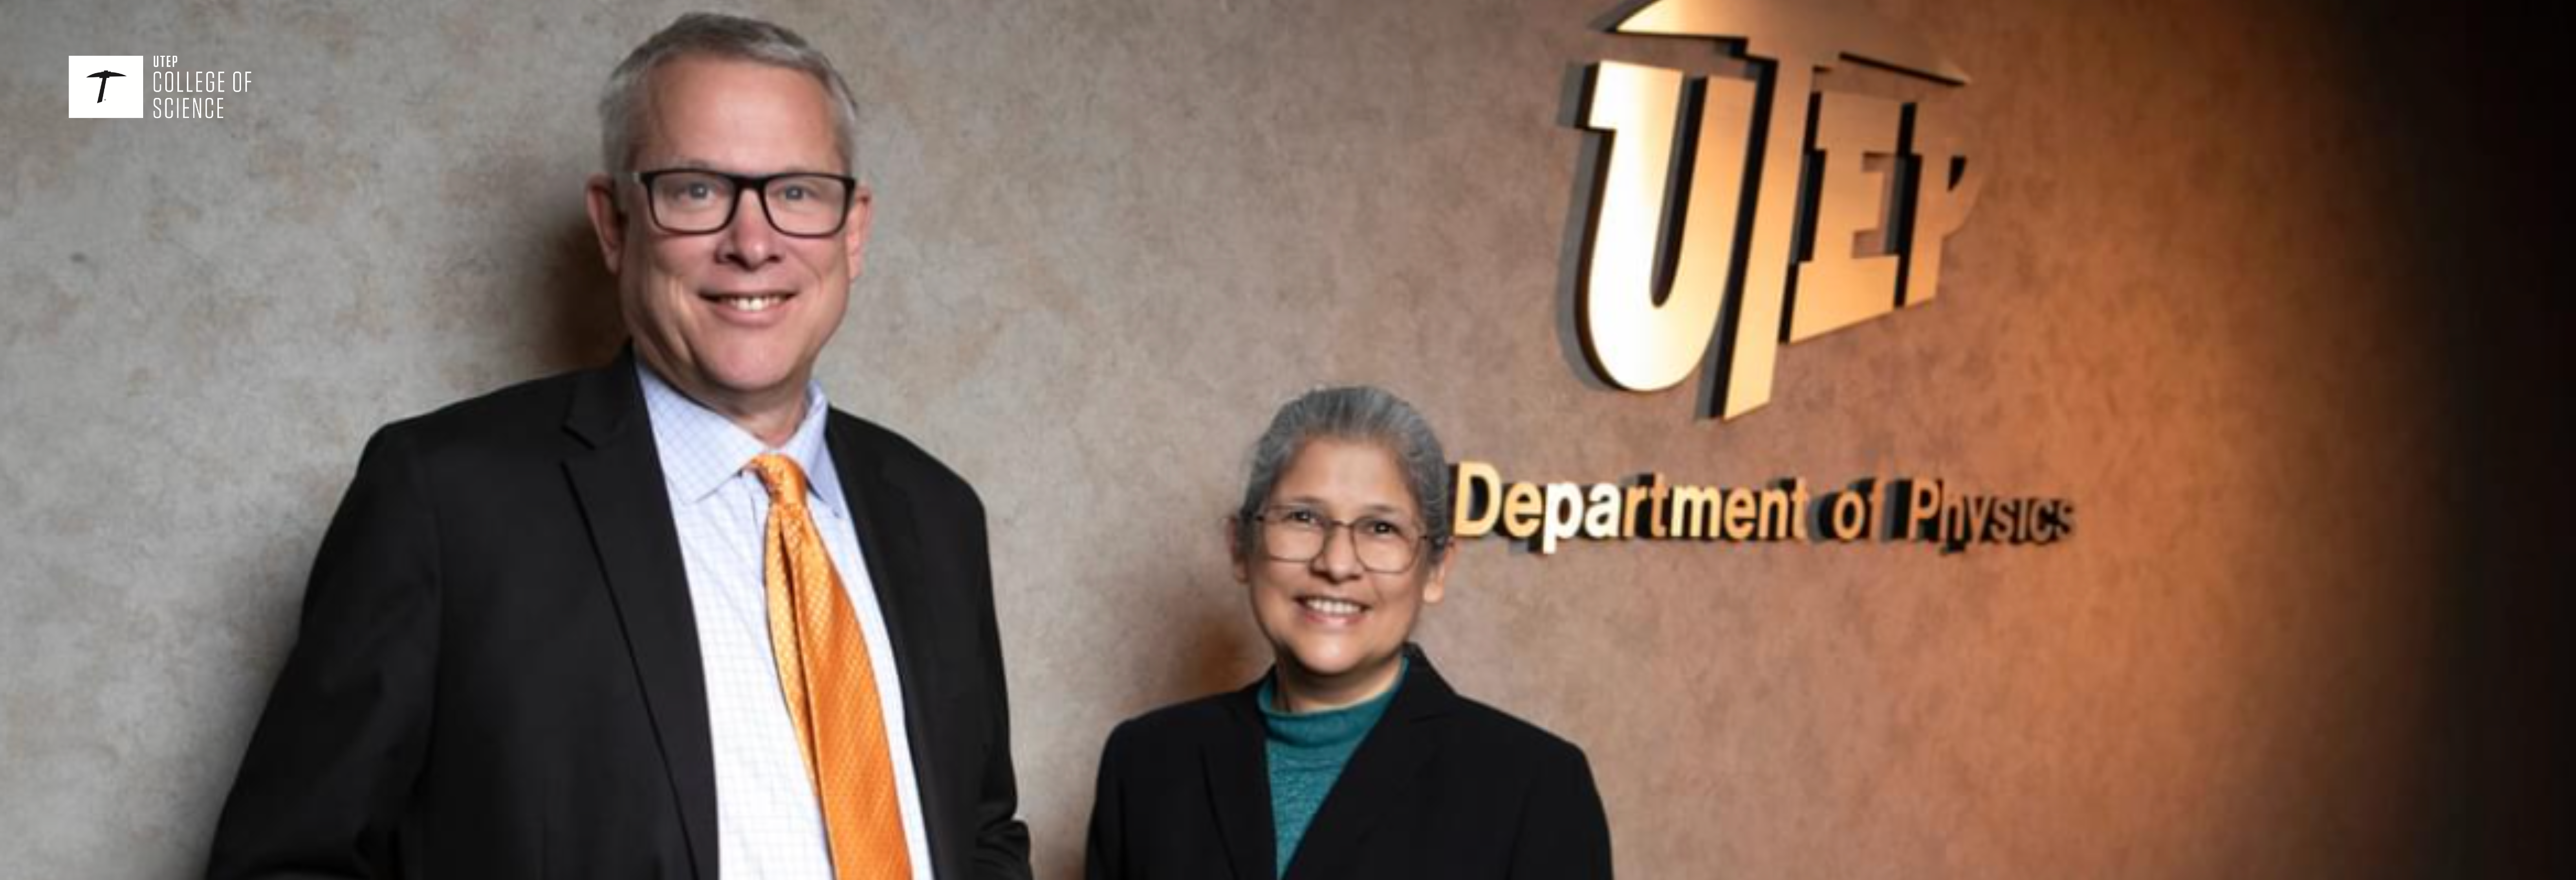 UTEP Launches Ph.D. in Physics 